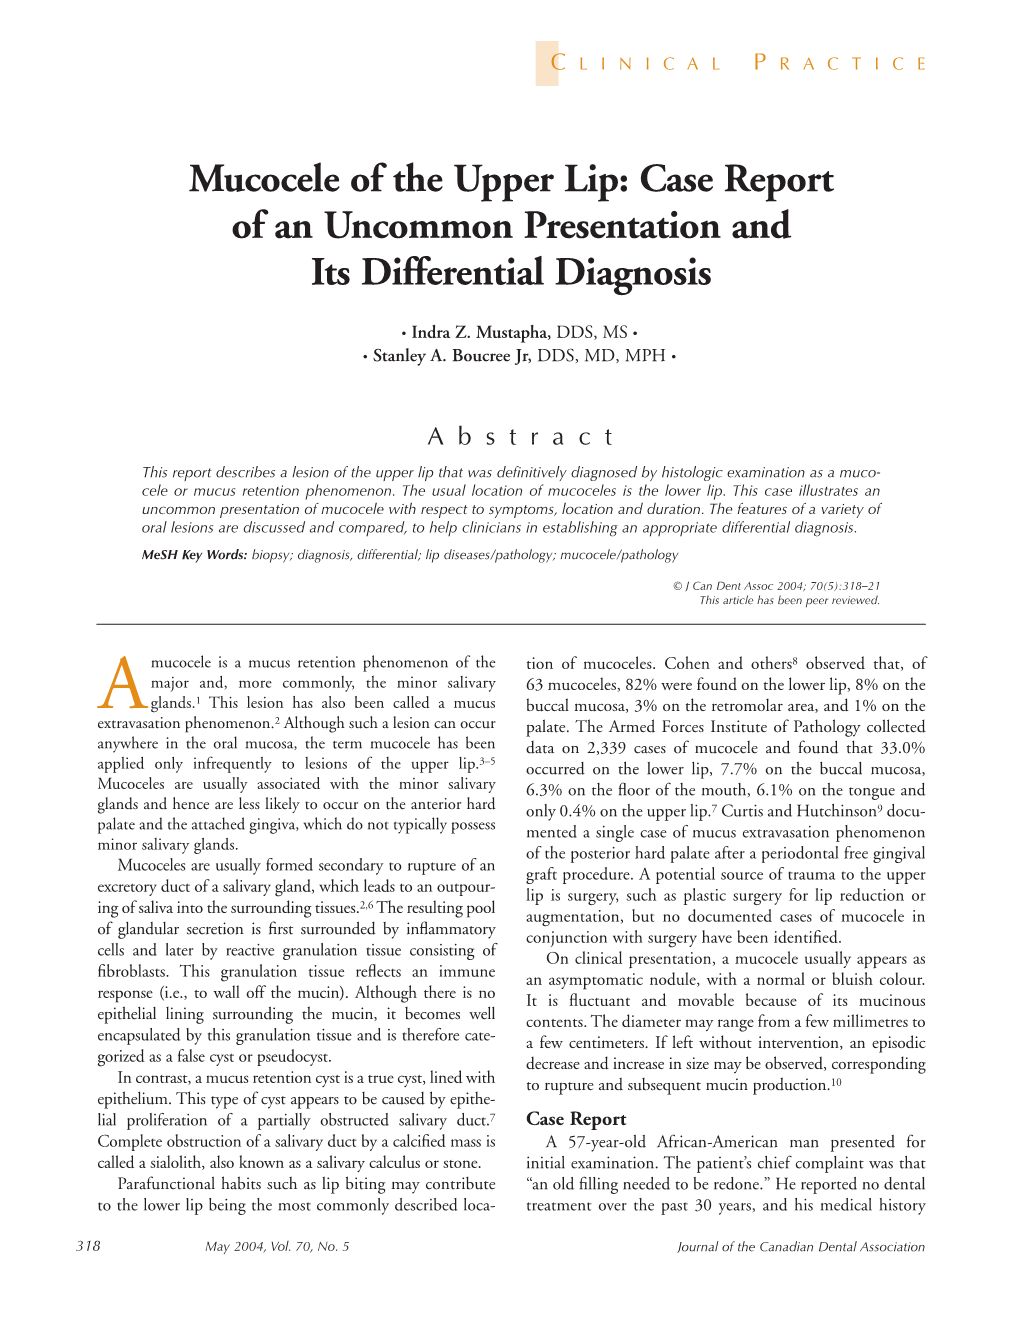 Mucocele of the Upper Lip: Case Report of an Uncommon Presentation and Its Differential Diagnosis